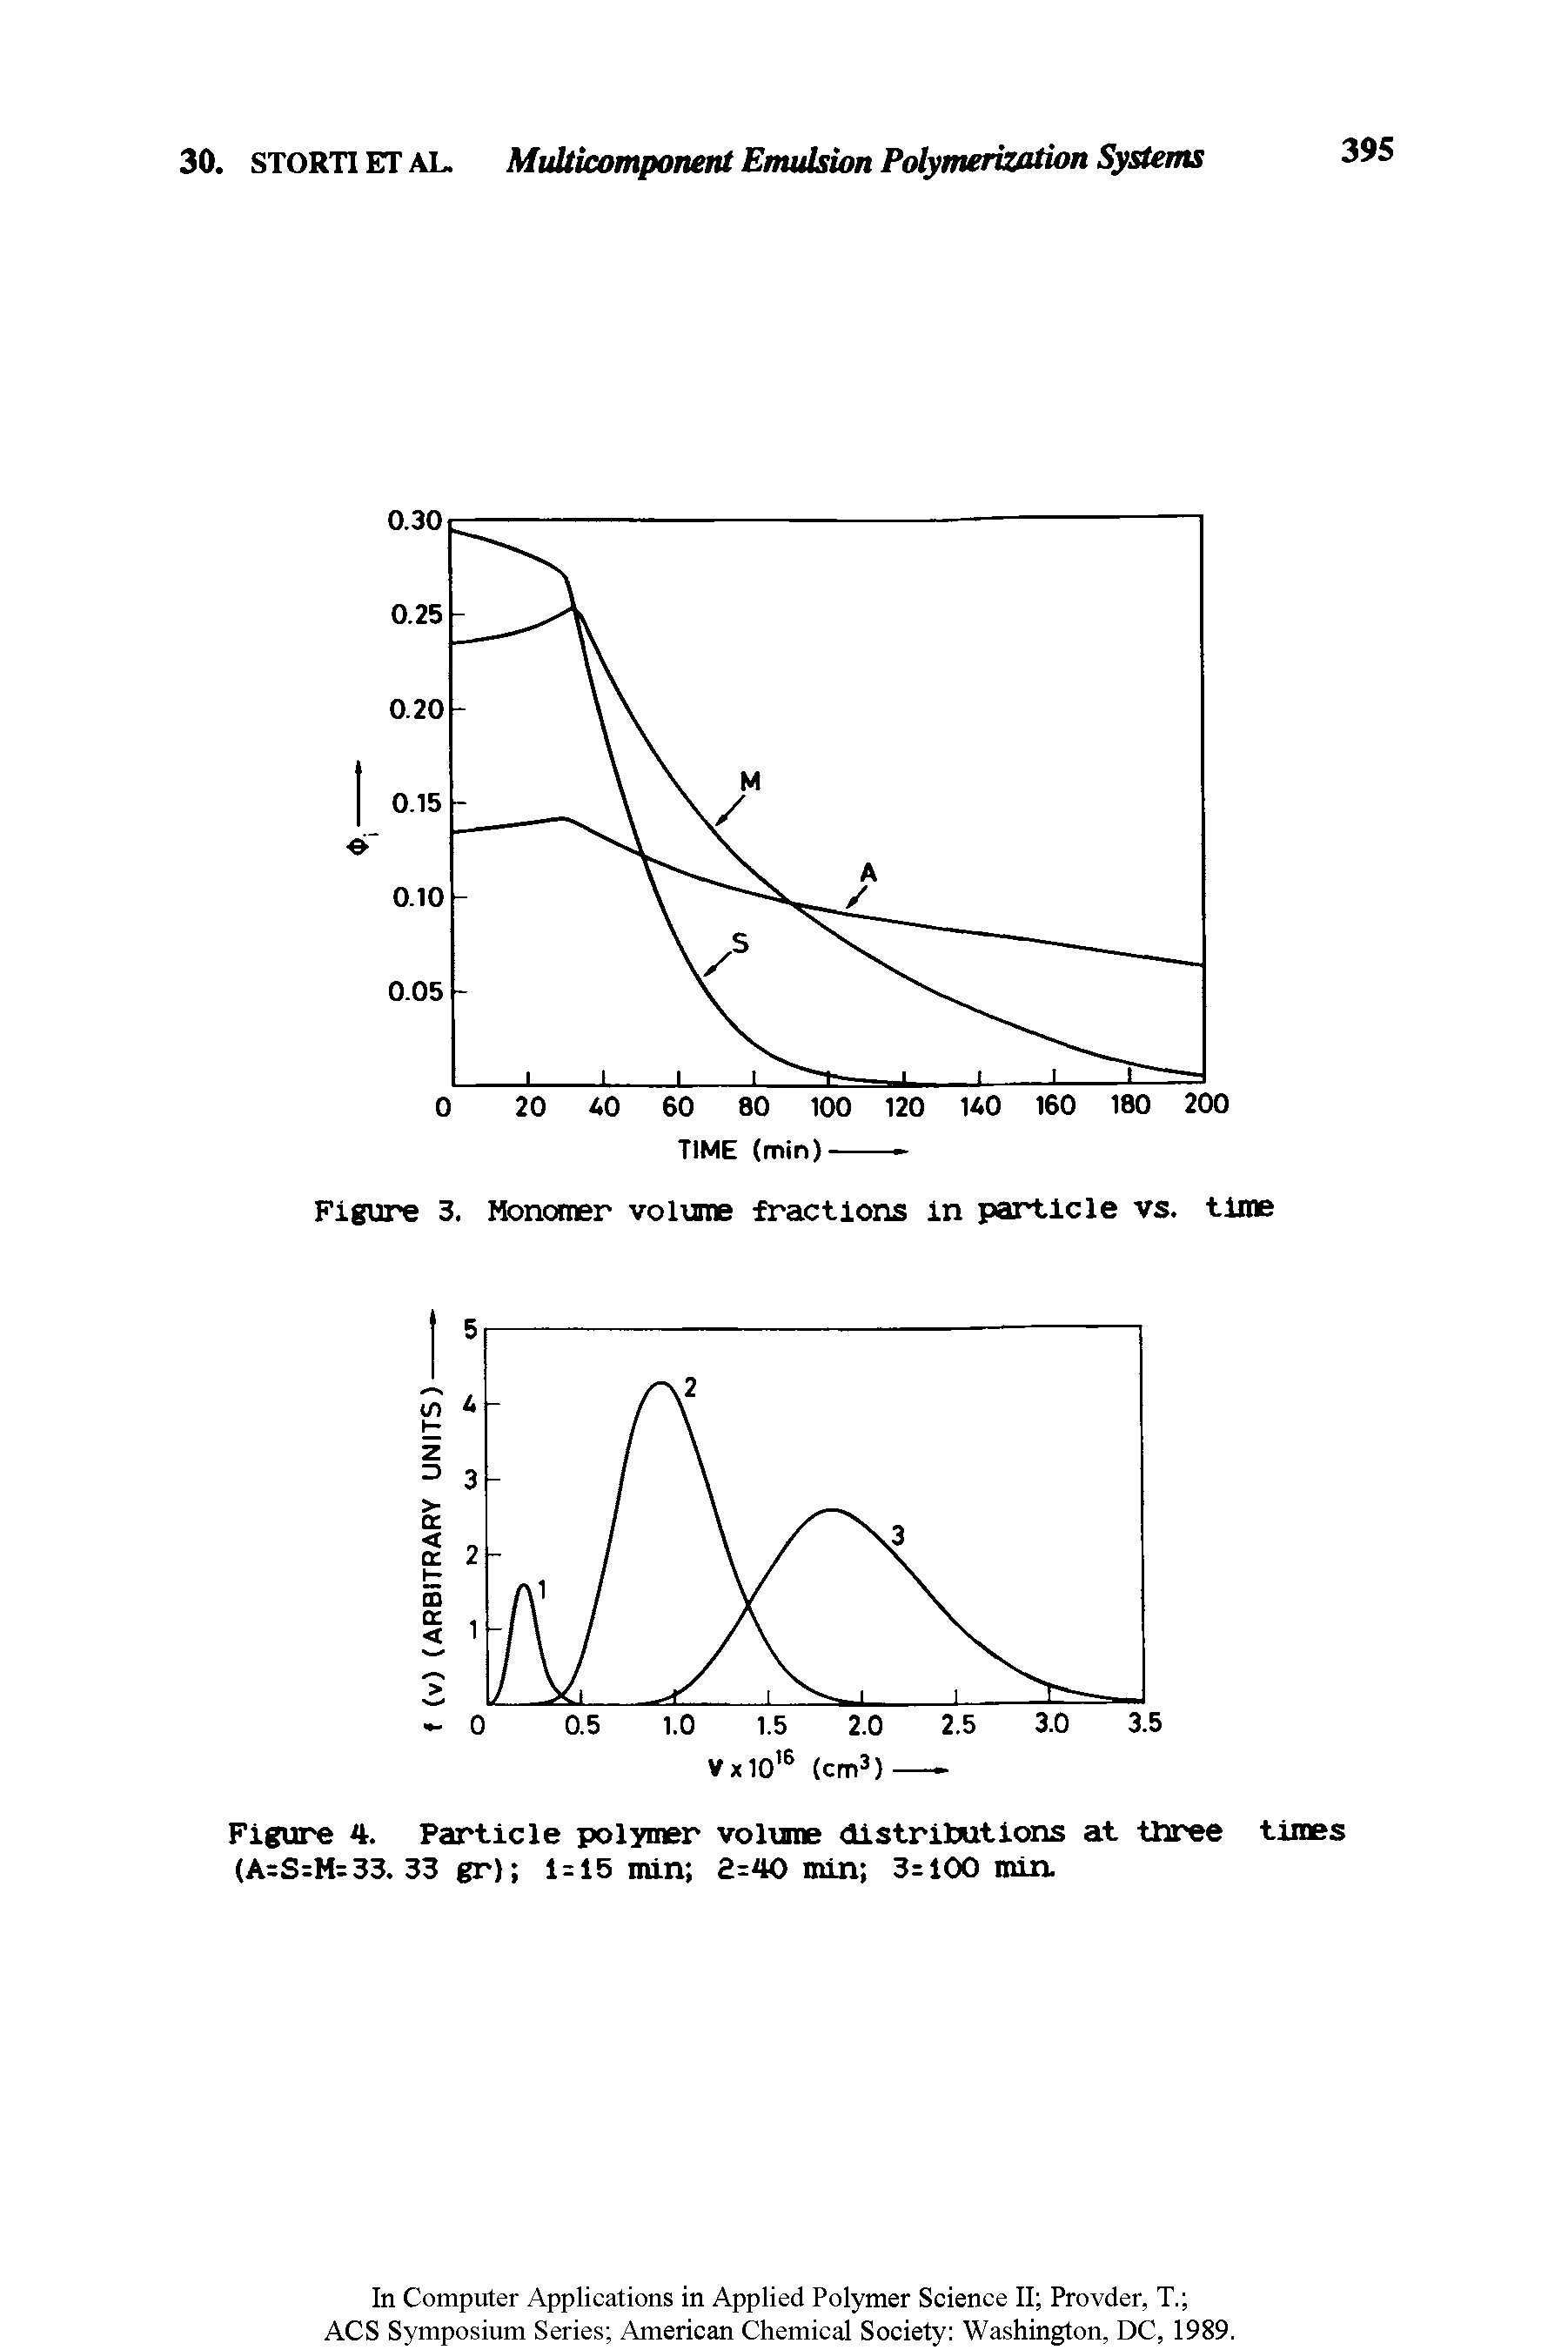 Figure 4. Particle polymer volume distrit tions at three times (A S H=33. 33 gr) 1 = 15 min 2=40 min 3=100 min.